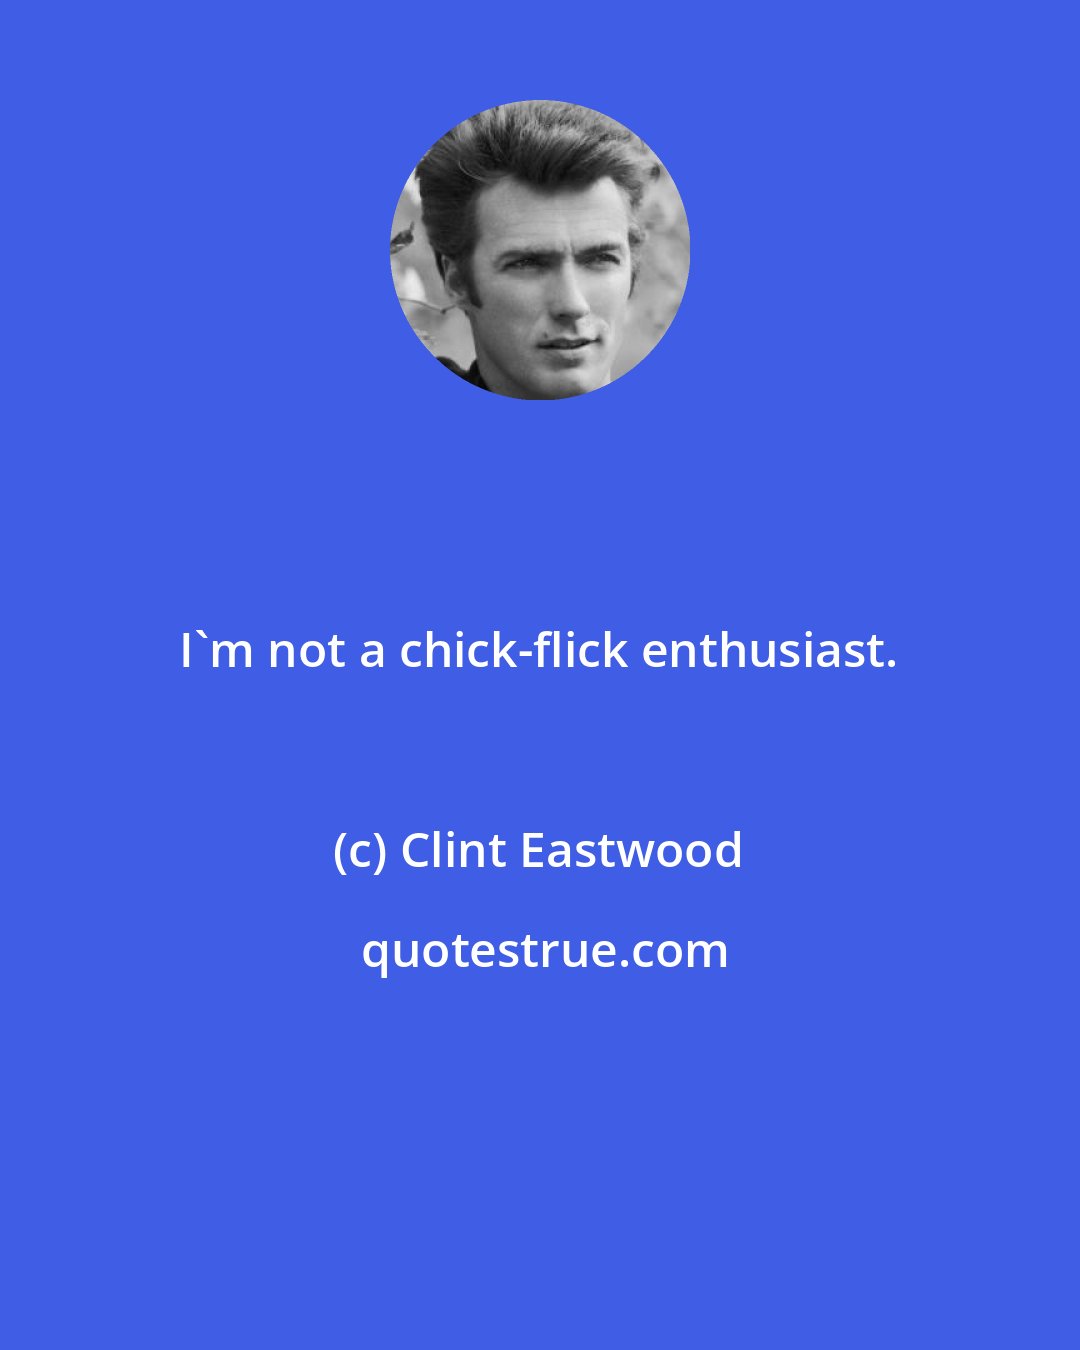 Clint Eastwood: I'm not a chick-flick enthusiast.